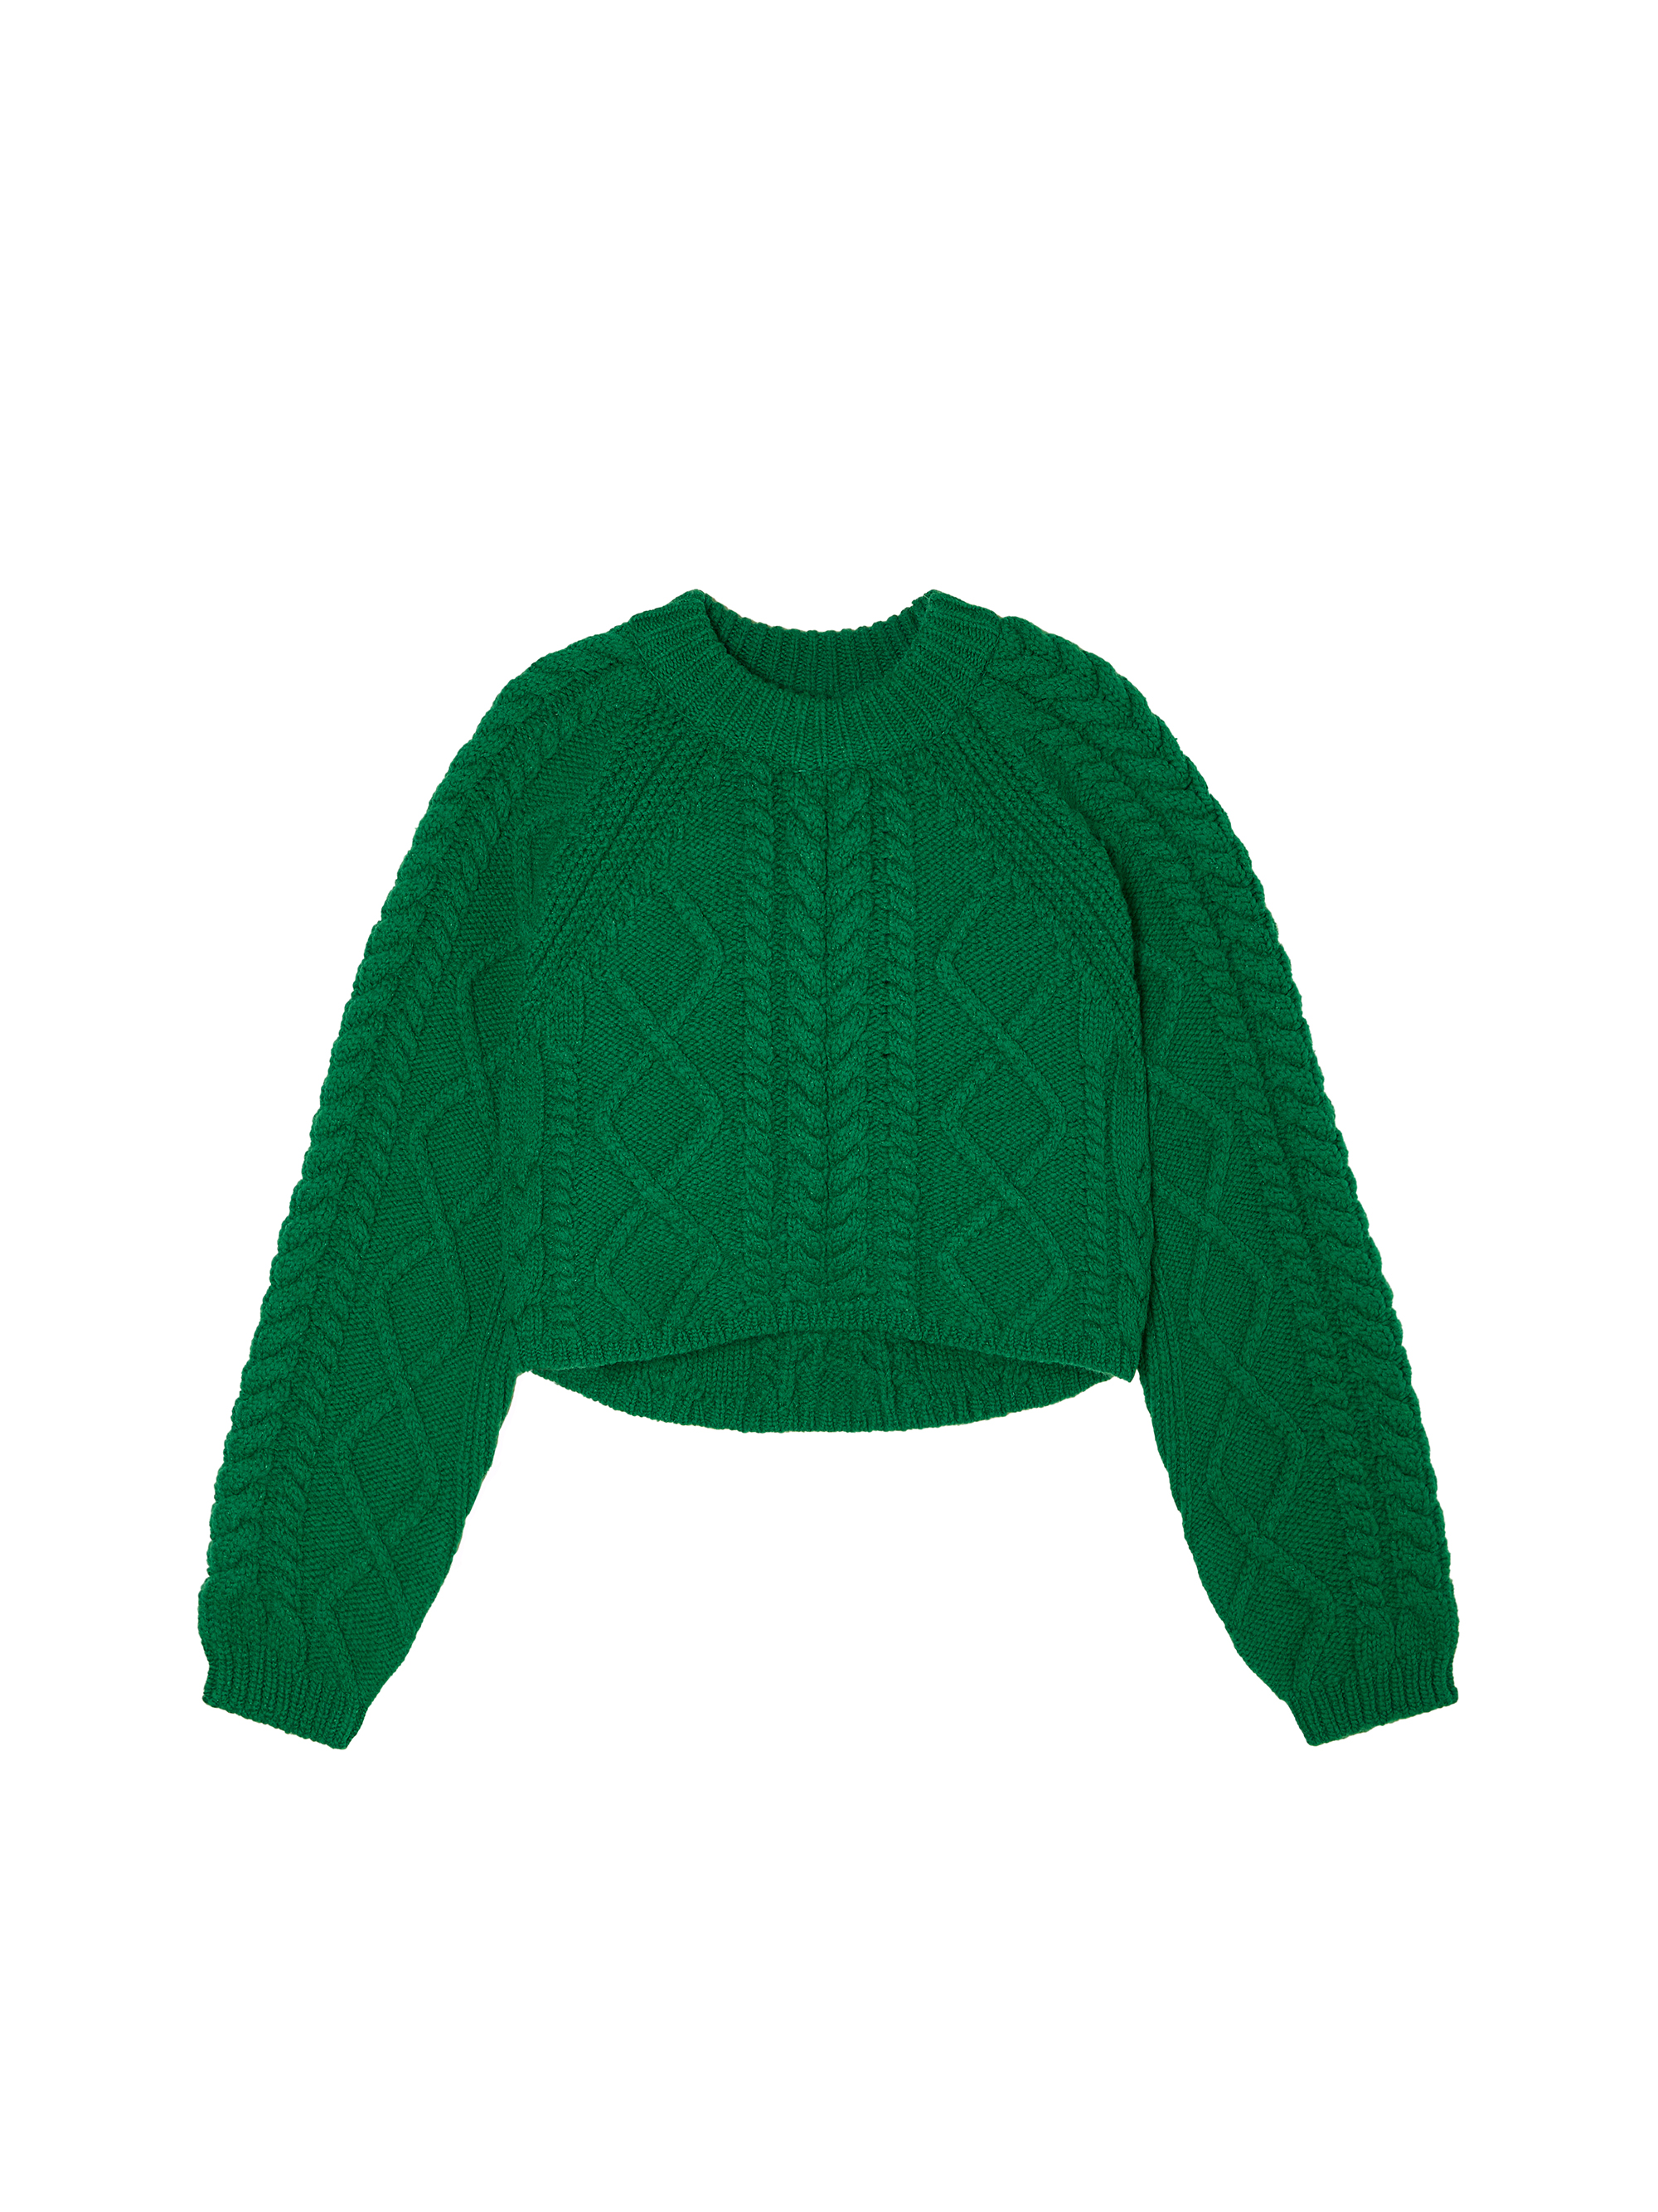 Cable Knitted Cropped Sweater / 케이블 니트 크롭 스웨터